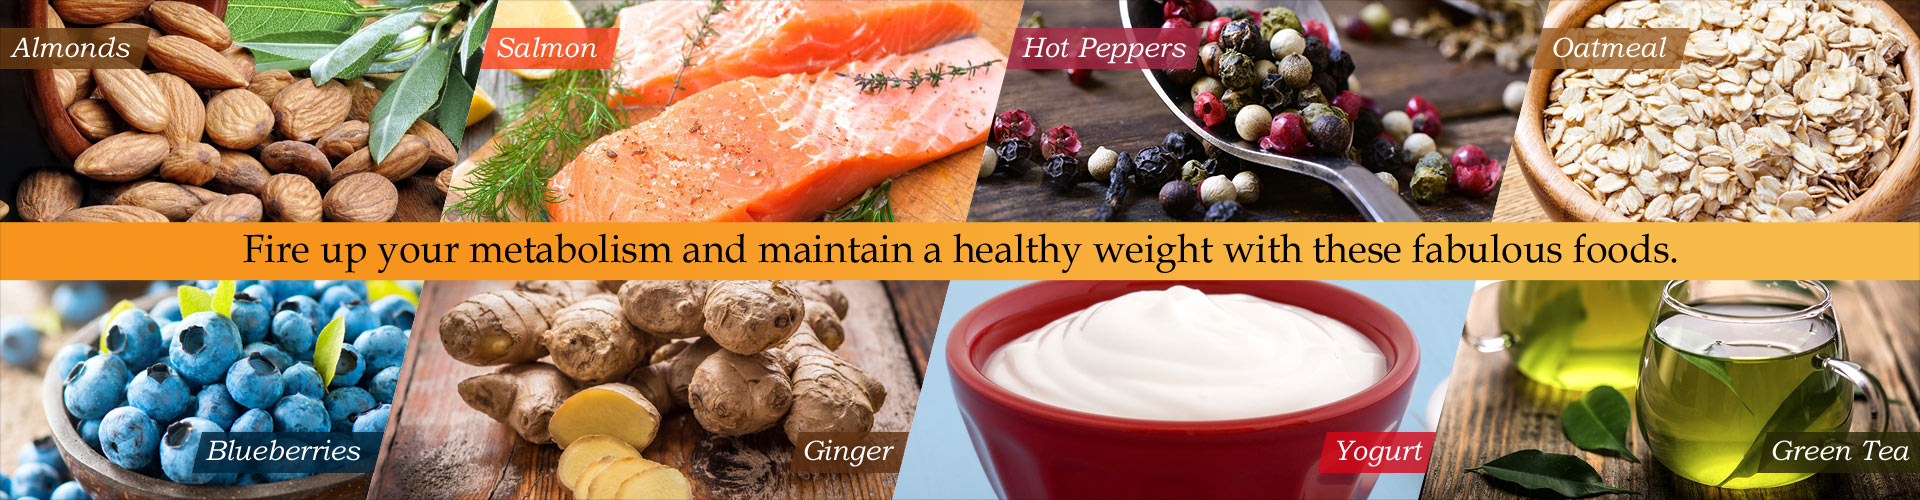 Fire up your metabolism and maintain a healthy weight with these fabulous foods.  Almonds, Salmon, Hot Peppers, Oatmeal, Blueberries, Ginger, Yogurt, Green Tea